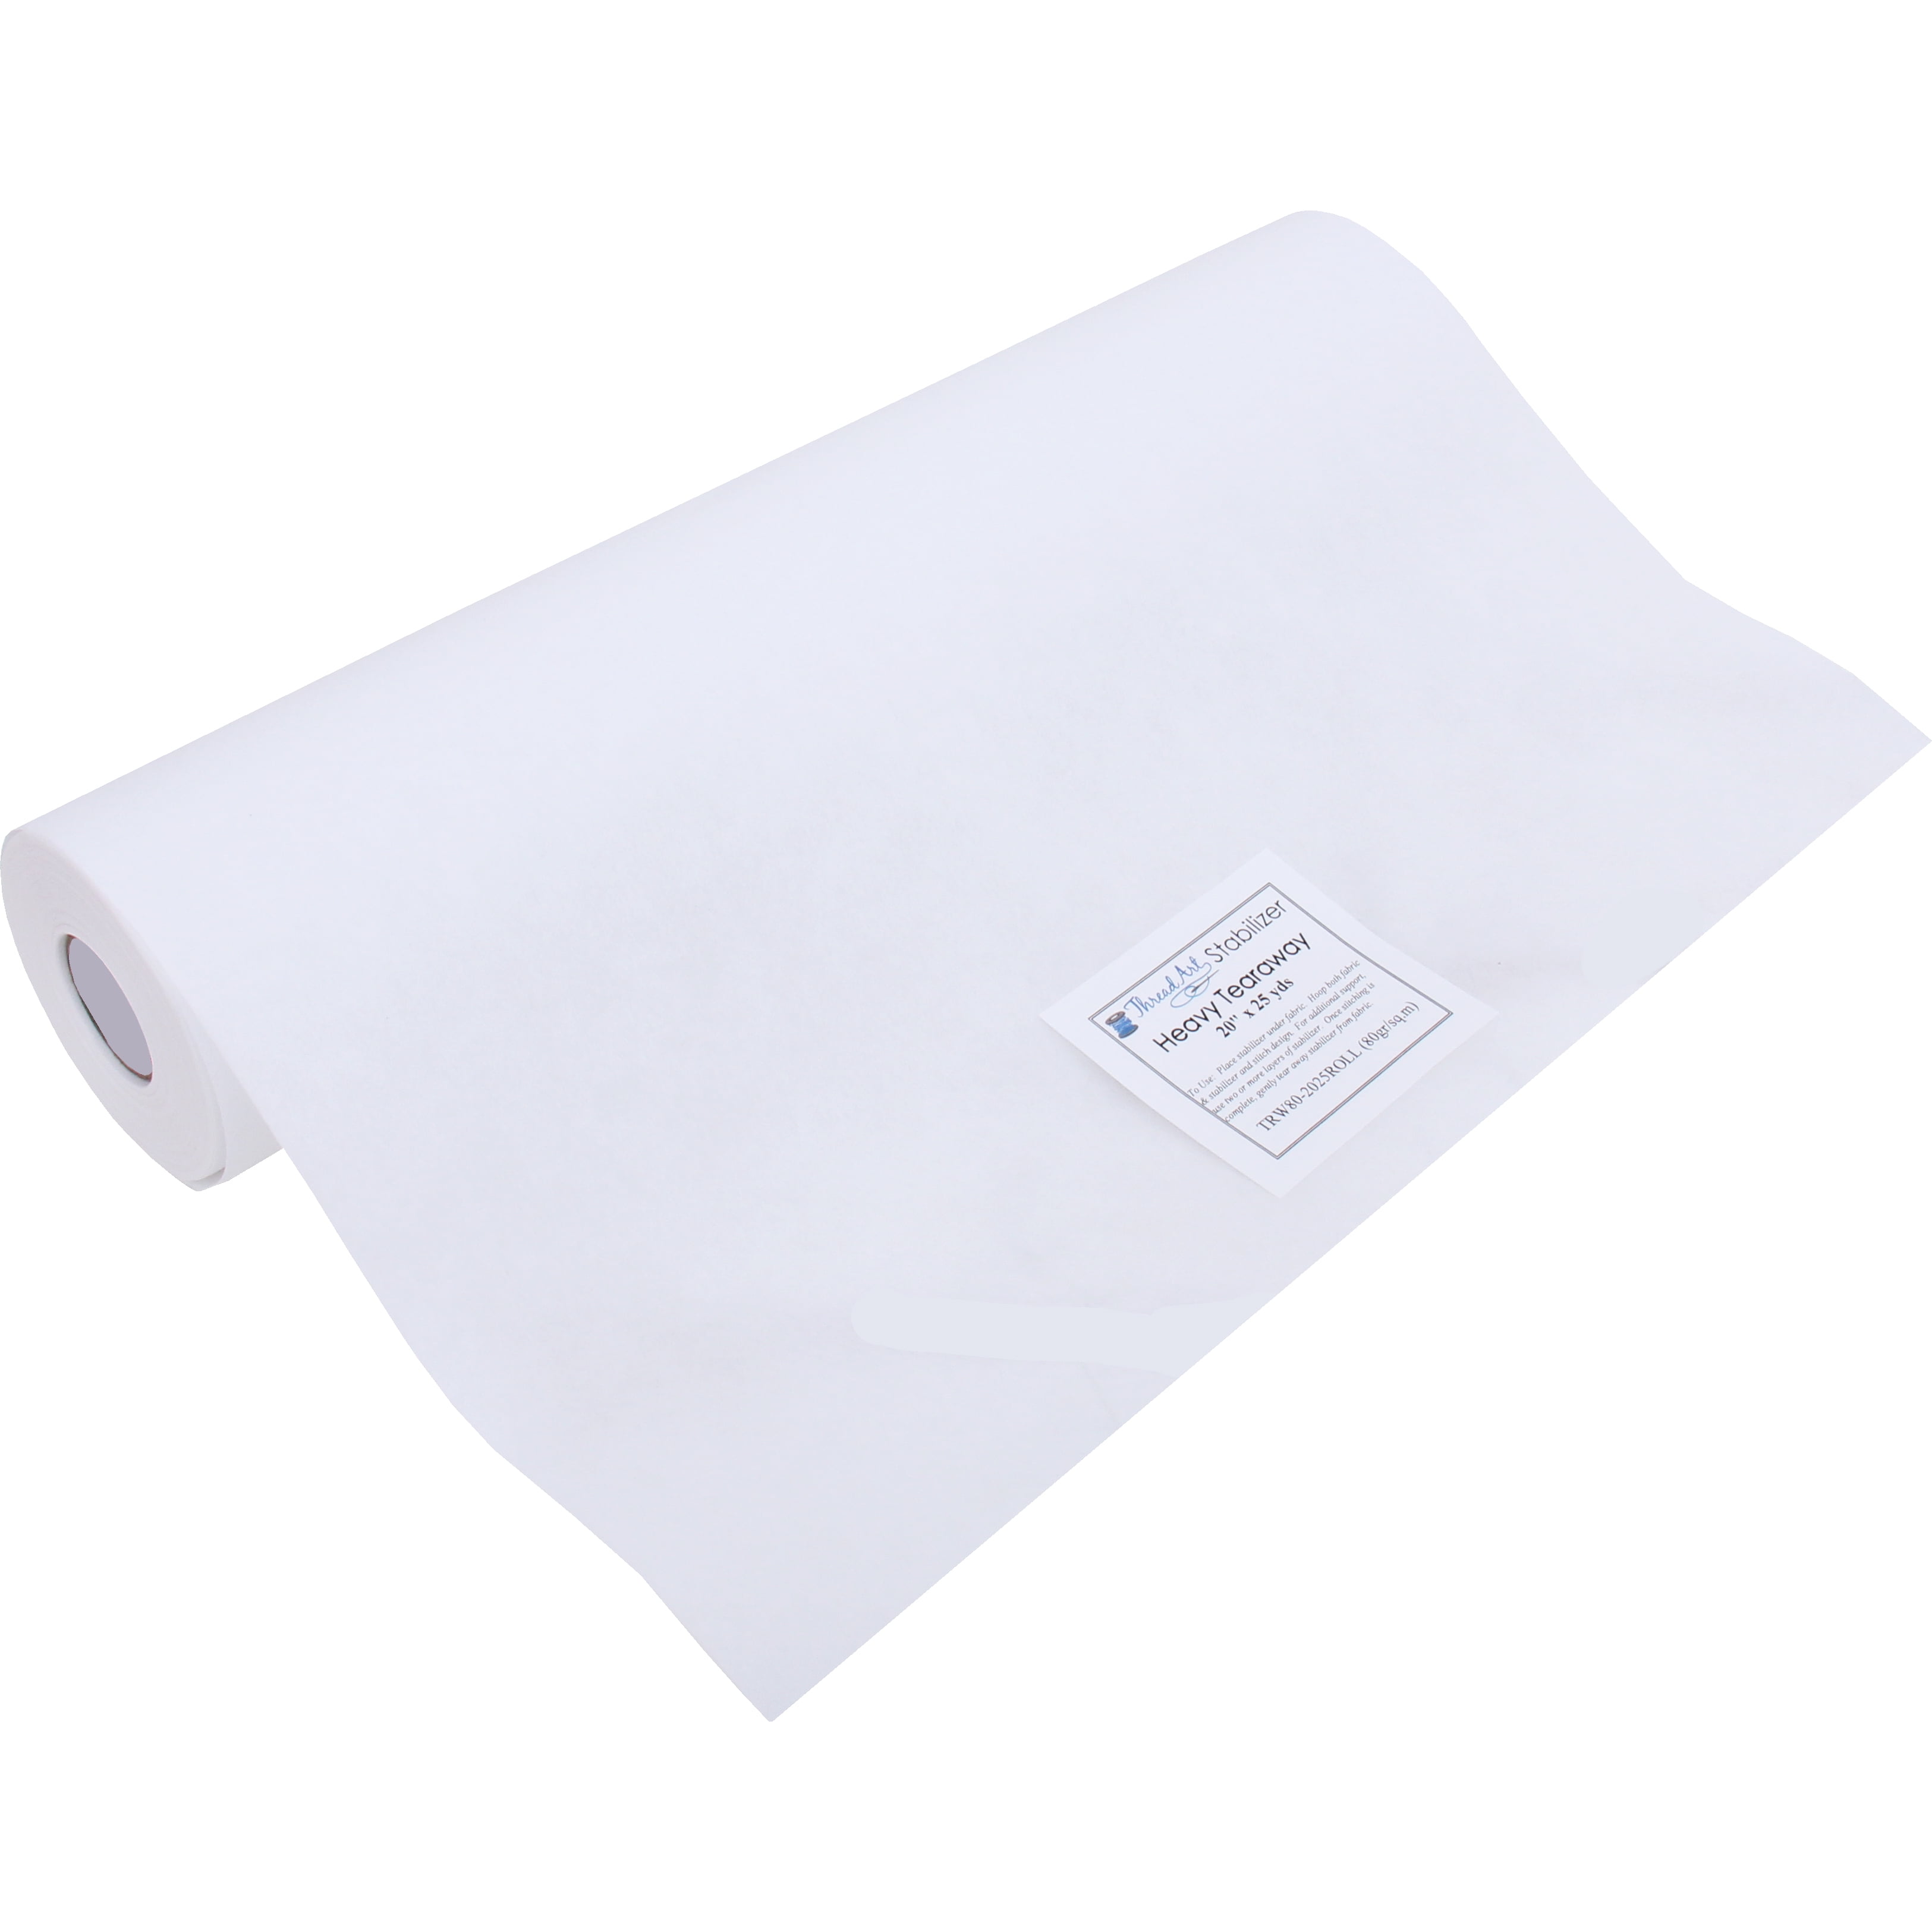 cold water soluble interlining stabilizer paper